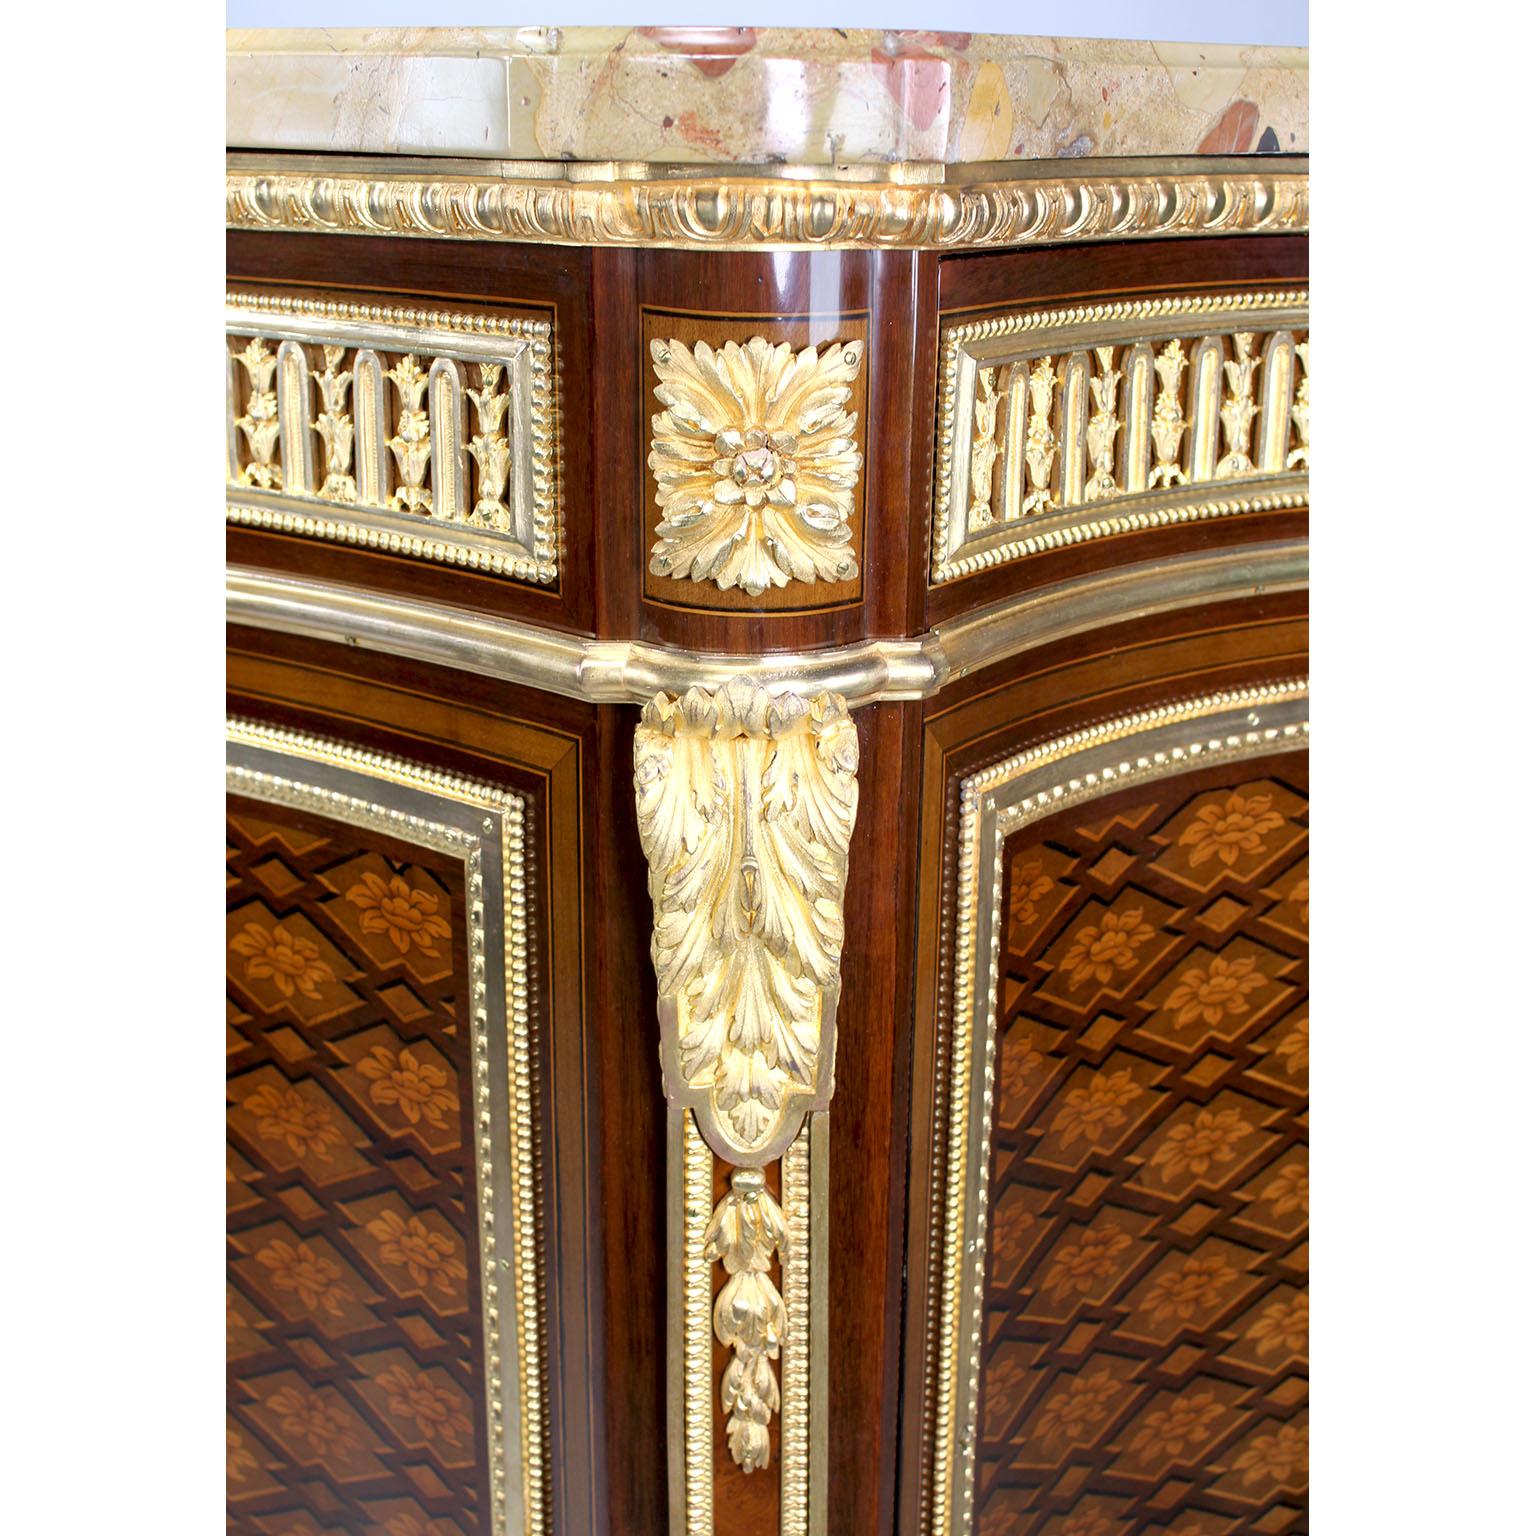 French 19th Century Louis XV-XVI Ormolu Mounted Marquetry Commode Marble Top For Sale 5